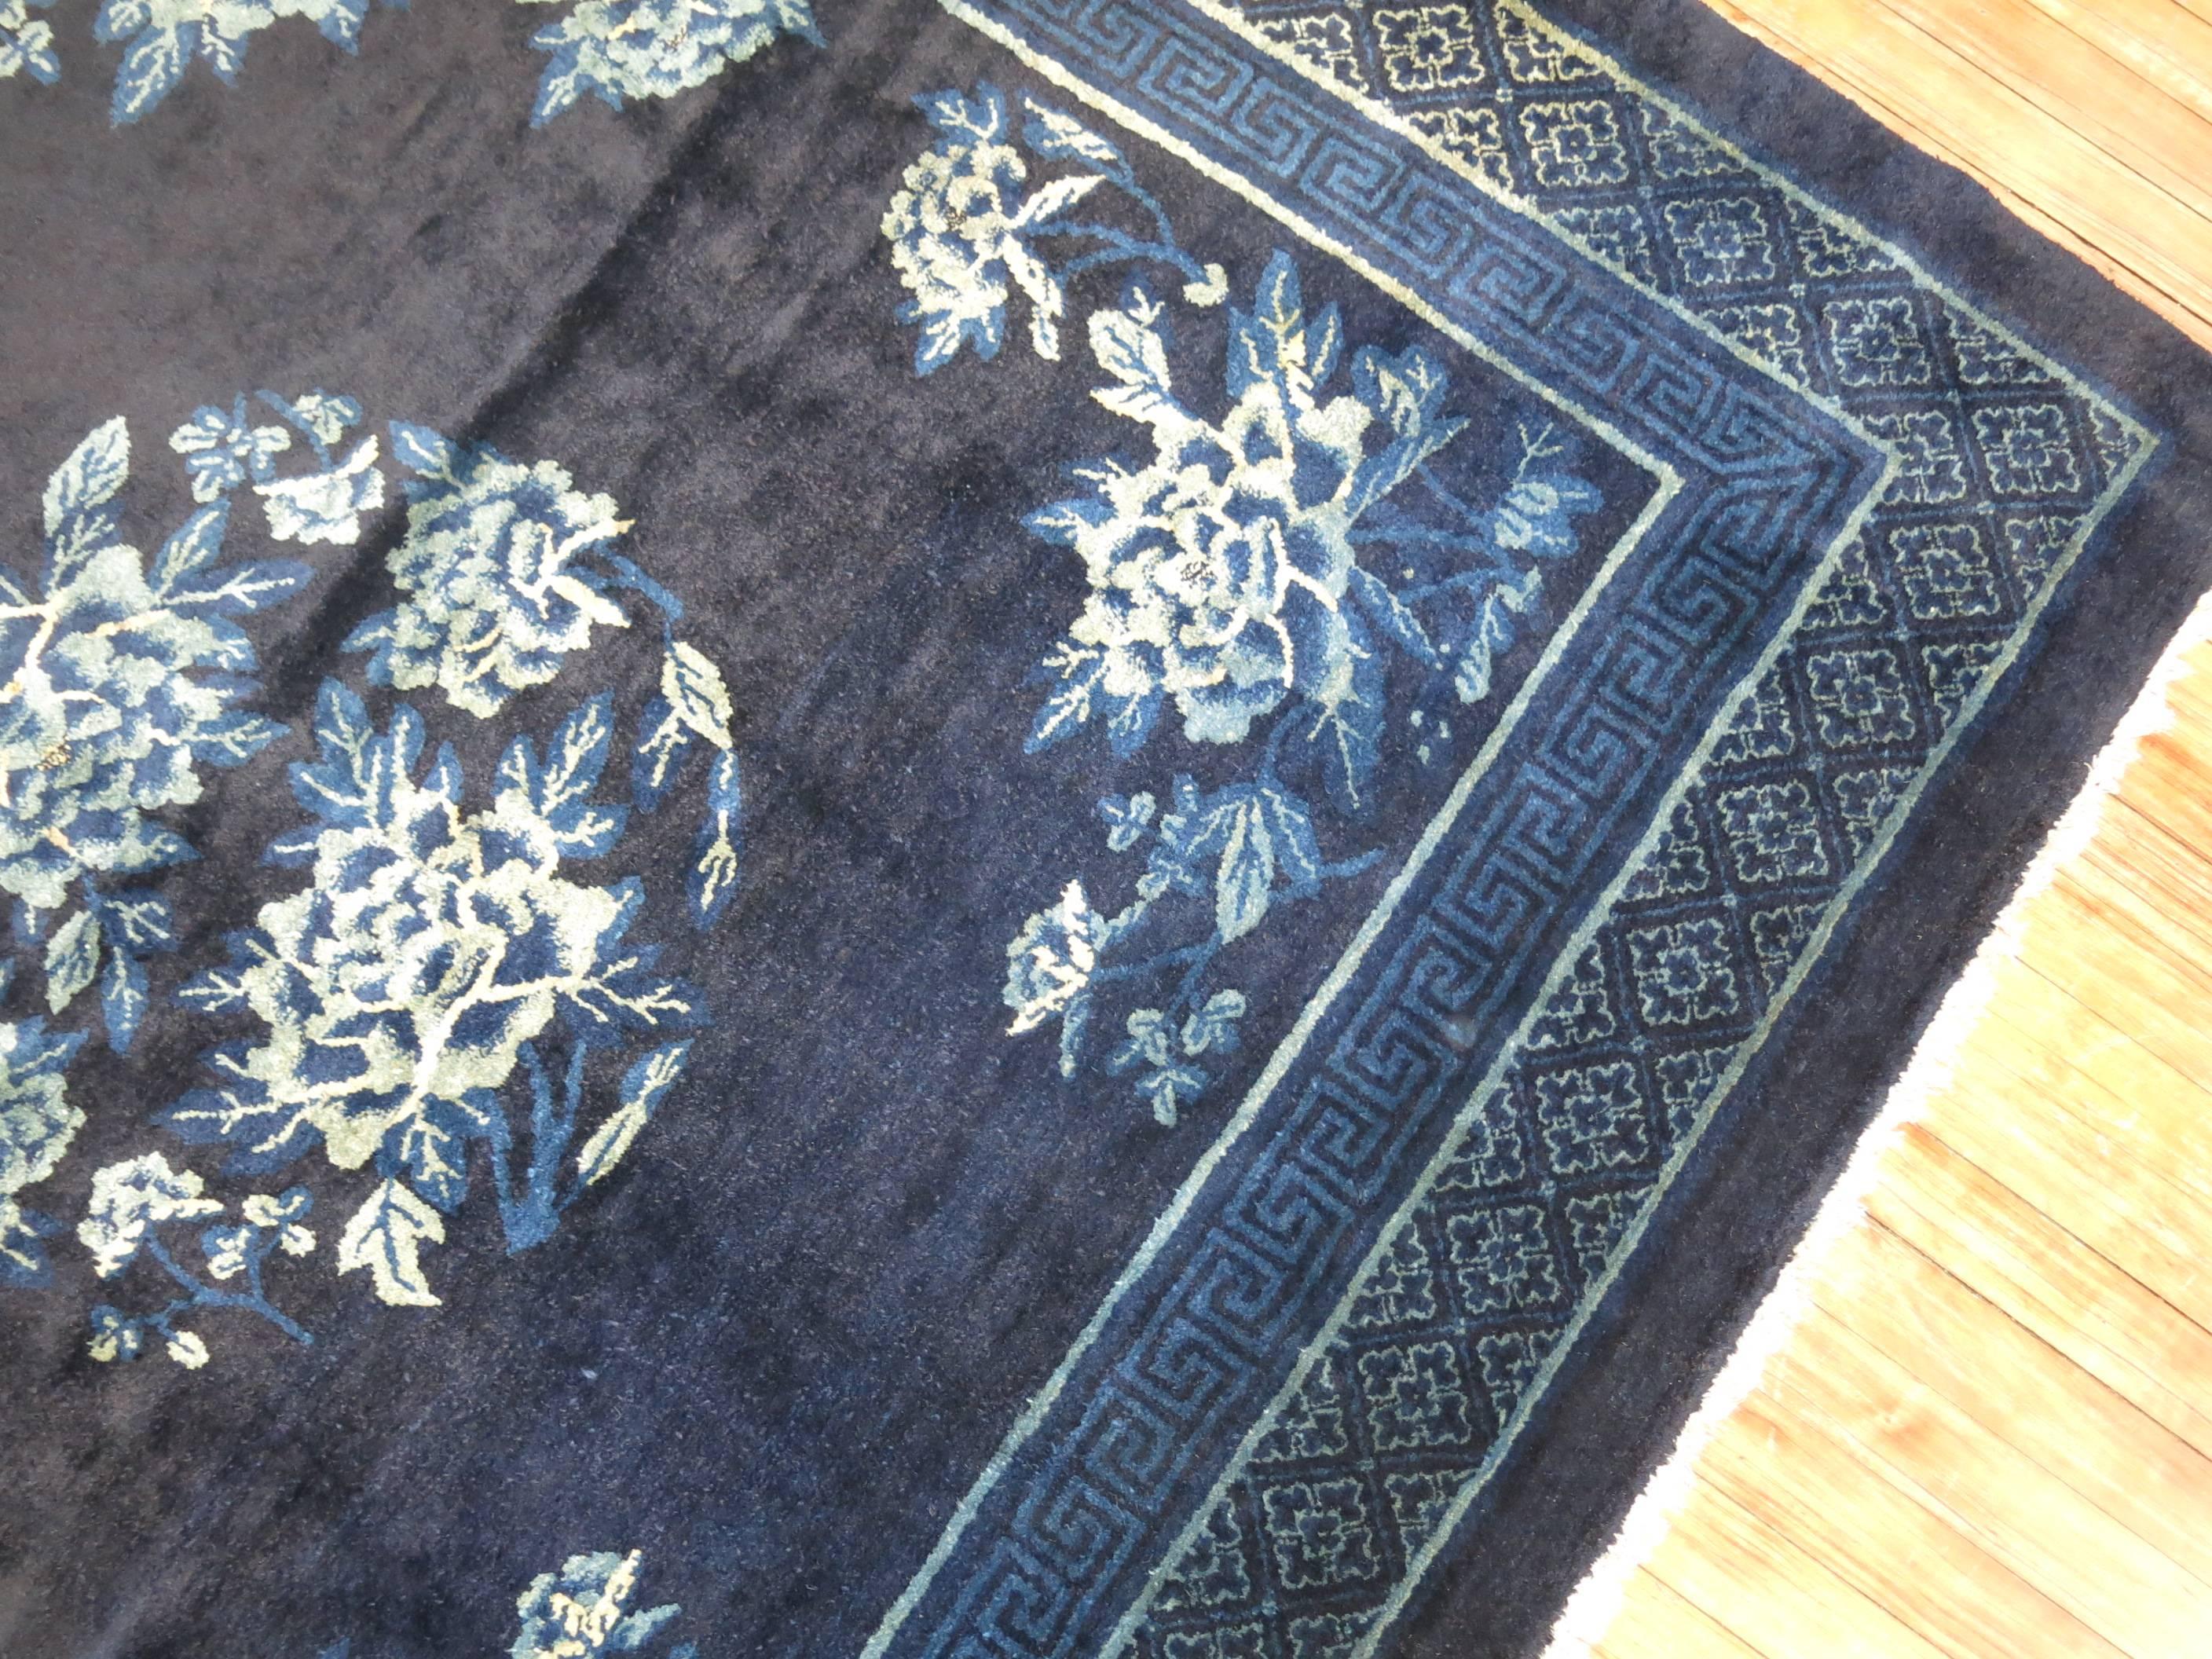 A vintage Chinese square rug in predominant shades of midnight blue. The wool is very soft and all the colors are natural.

Measures: 5'7” x 6'2”.